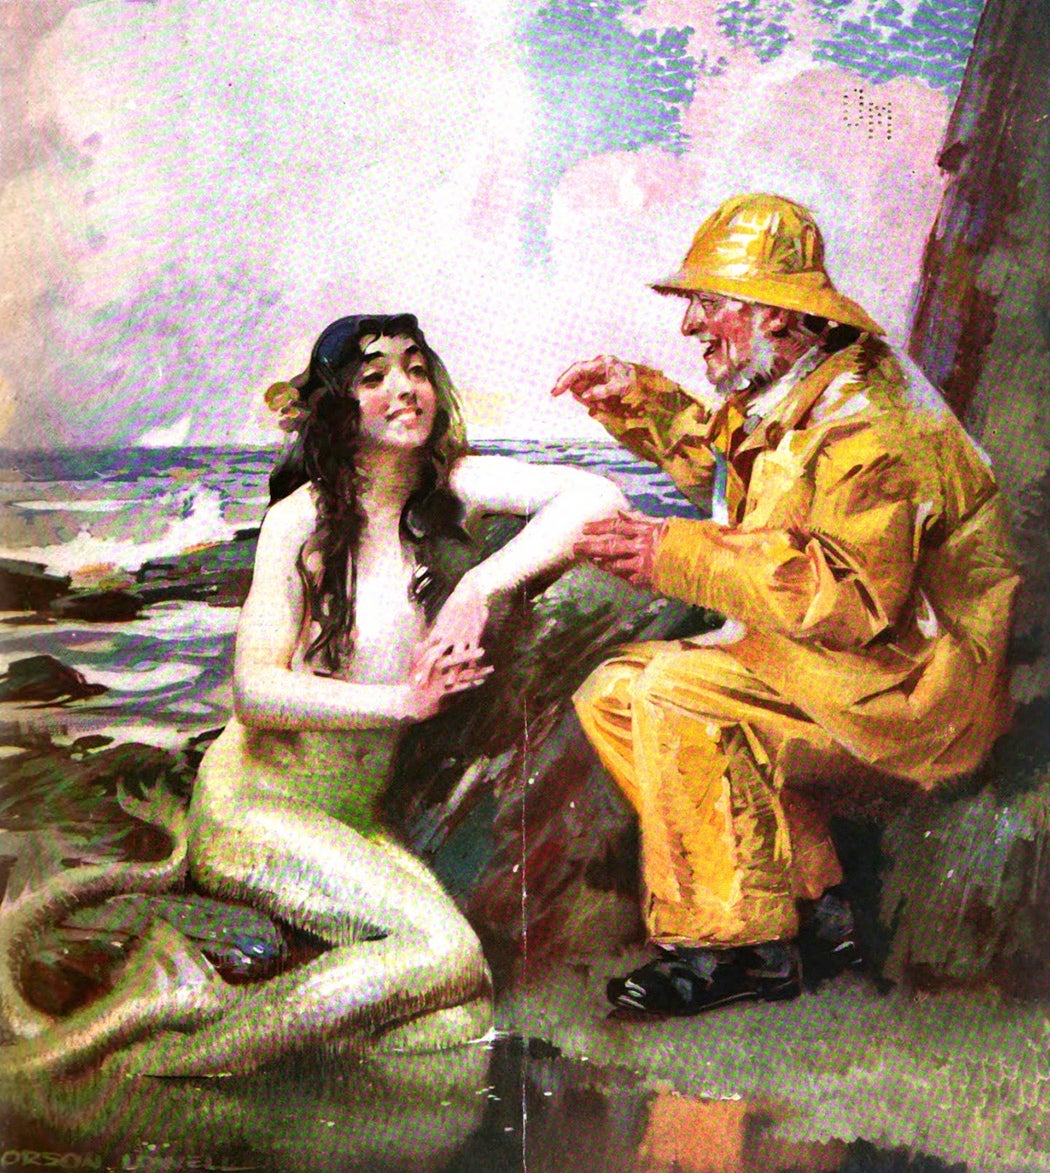 An illustration of a mermaid talking to a fisherman from the cover of Judge Magazine, 1916